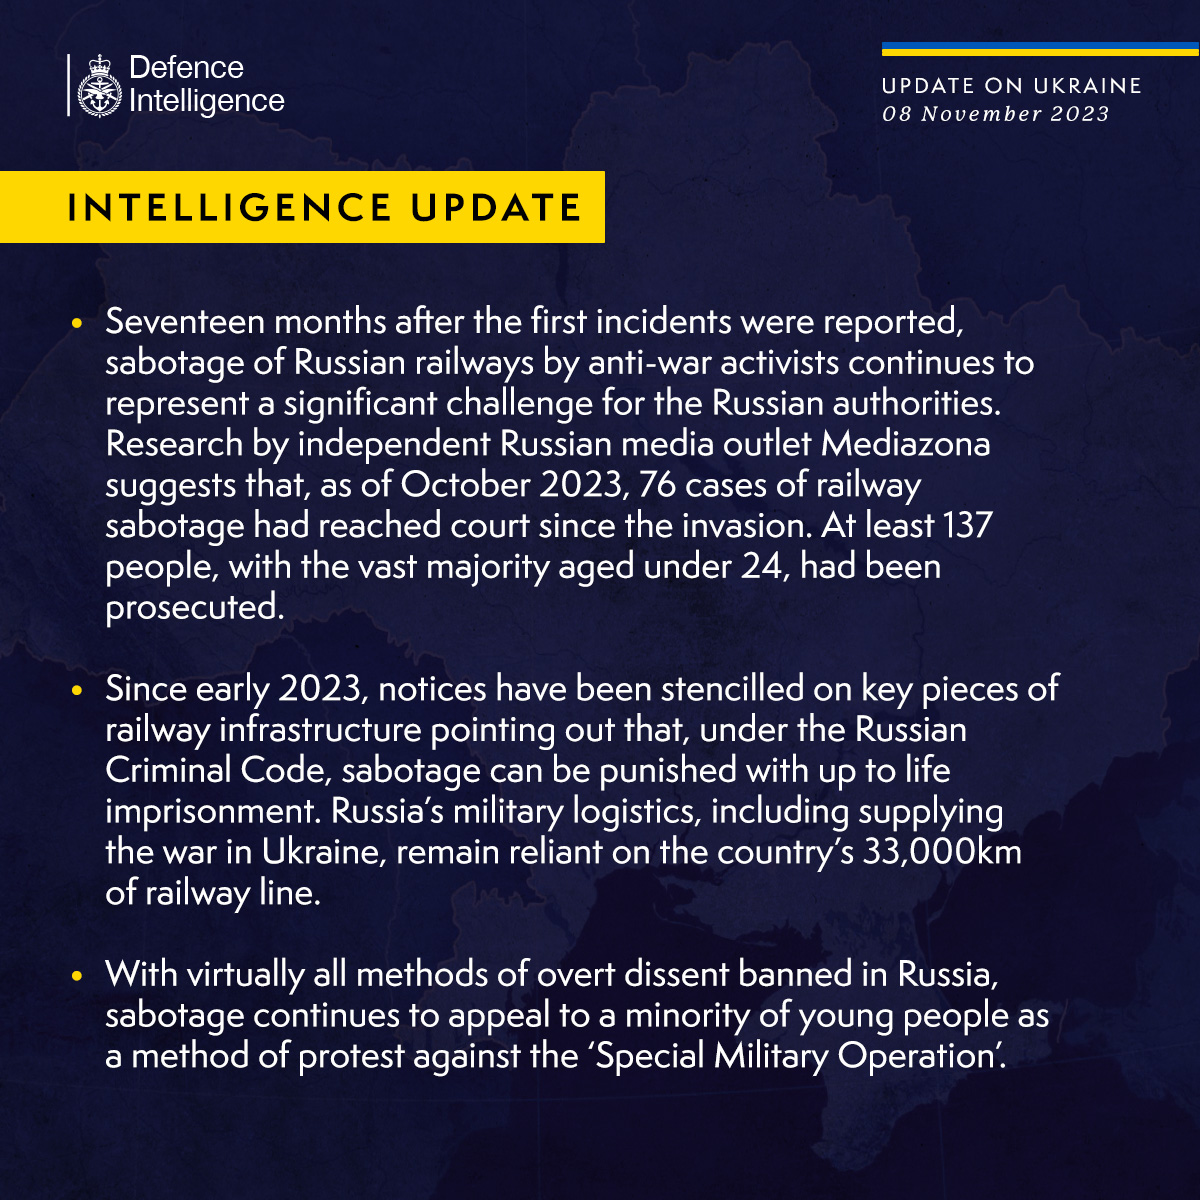 Latest Defence Intelligence update on the situation in Ukraine – 08 November 2023.